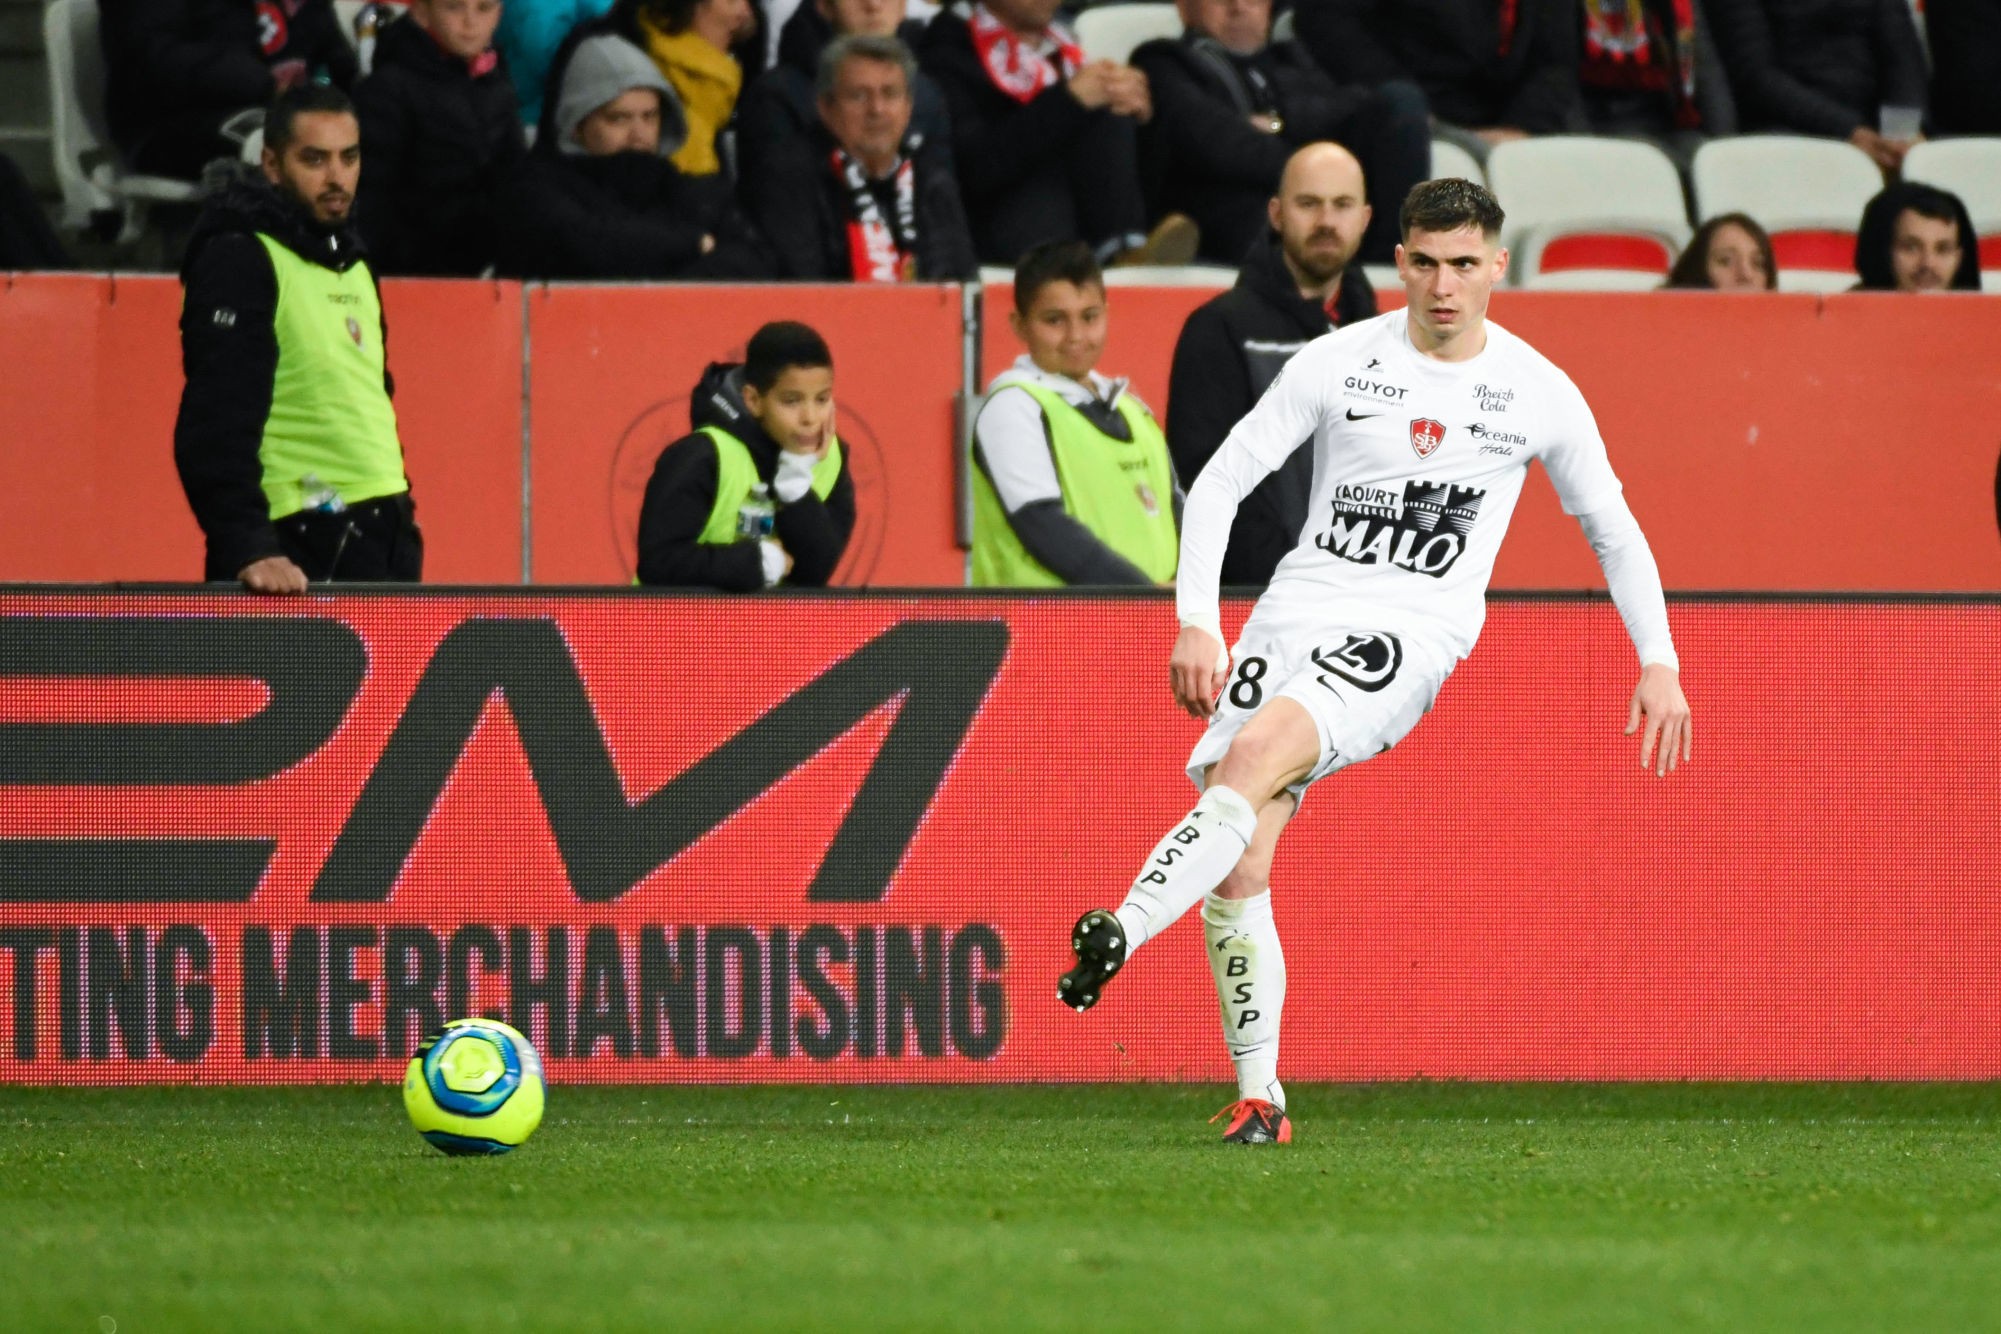 Romain PERRAUD of Brest during the Ligue 1 match between OGC Nice and Brest on February 21, 2020 in Nice, France. (Photo by Pascal Della Zuana/Icon Sport) - Romain PERRAUD - Allianz Riviera - Nice (France)